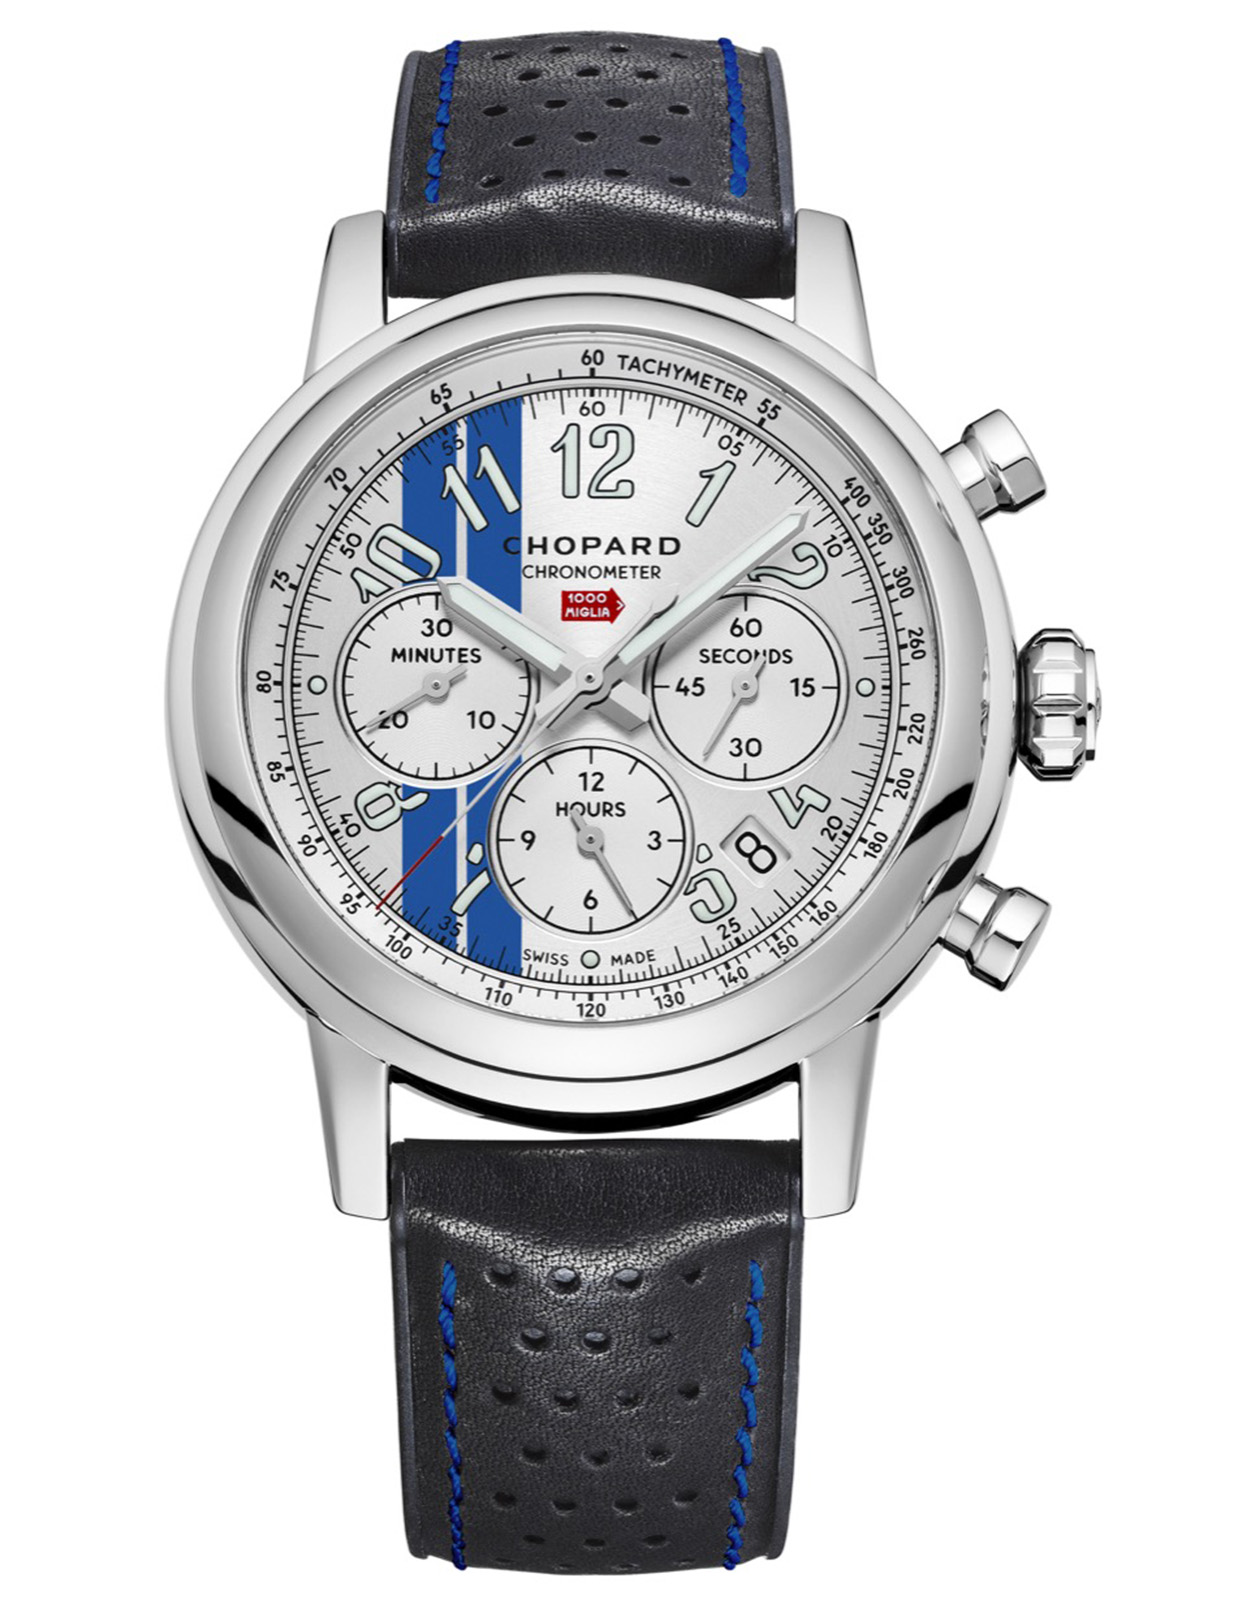 Chopard Mille Miglia Classic Chronograph Racing Stripes Edition